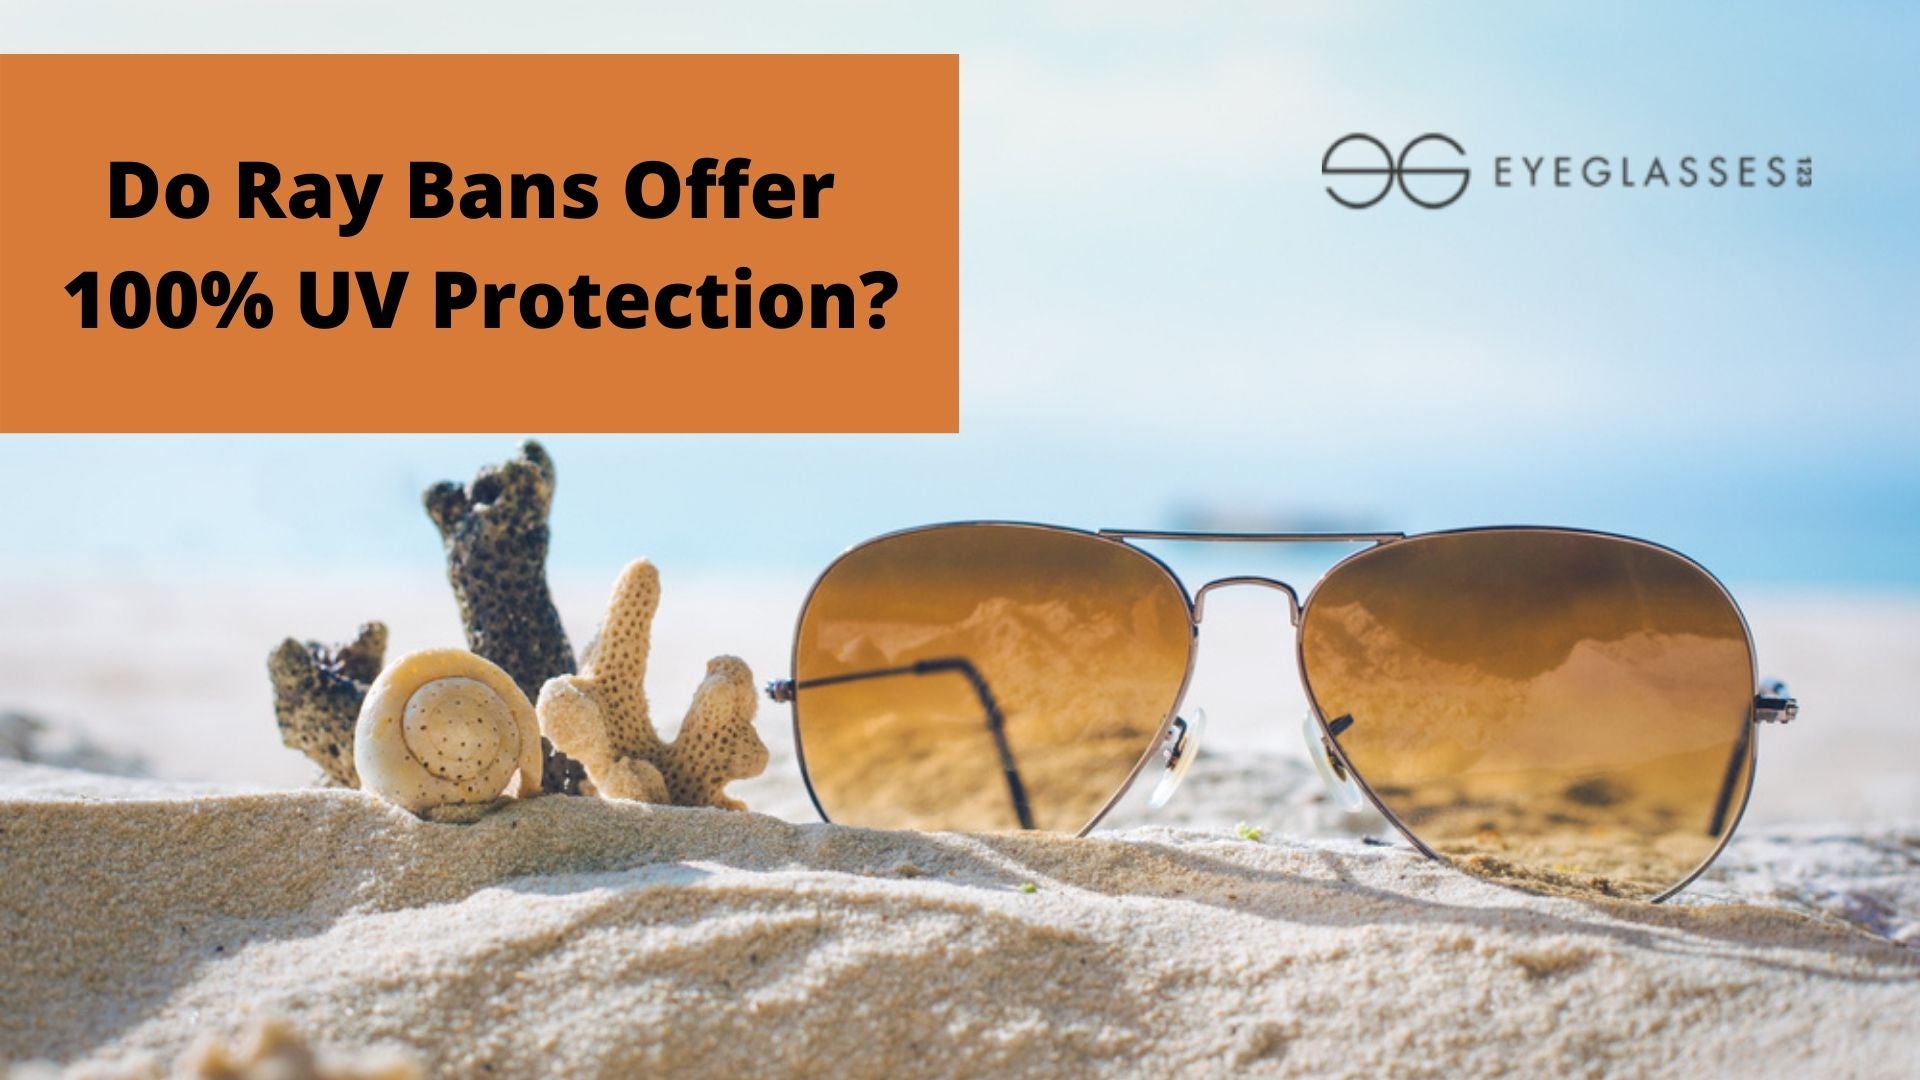 Do Ray Bans Offer 100% UV Protection?